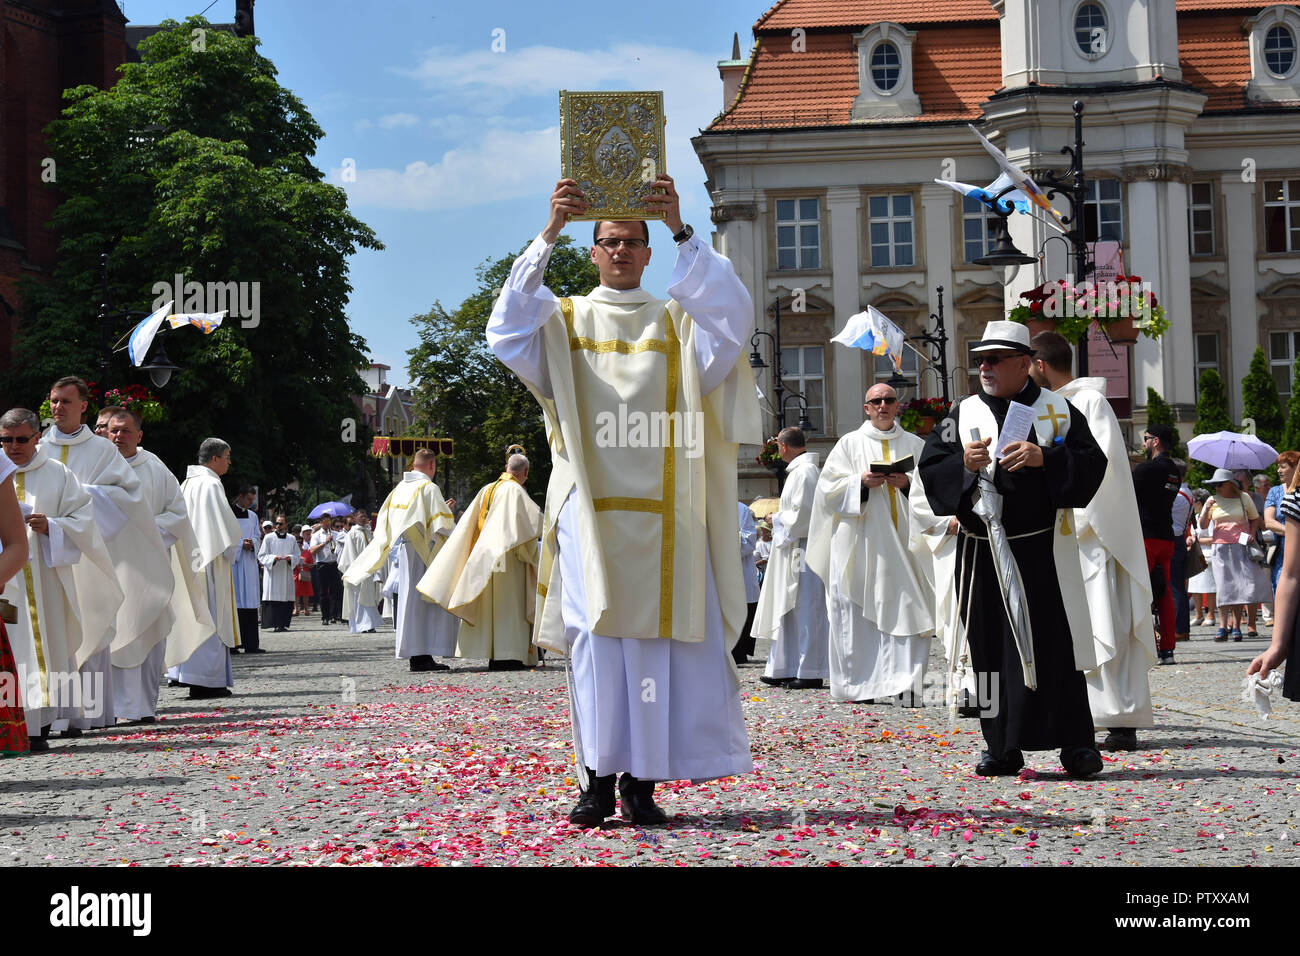 Wroclaw, Poland. 20th June, 2019. Celebration of The Feast of Corpus Christi on June 20, 2019 in Wroclaw, Poland. Credit: East News sp. z o.o./Alamy Live News Stock Photo